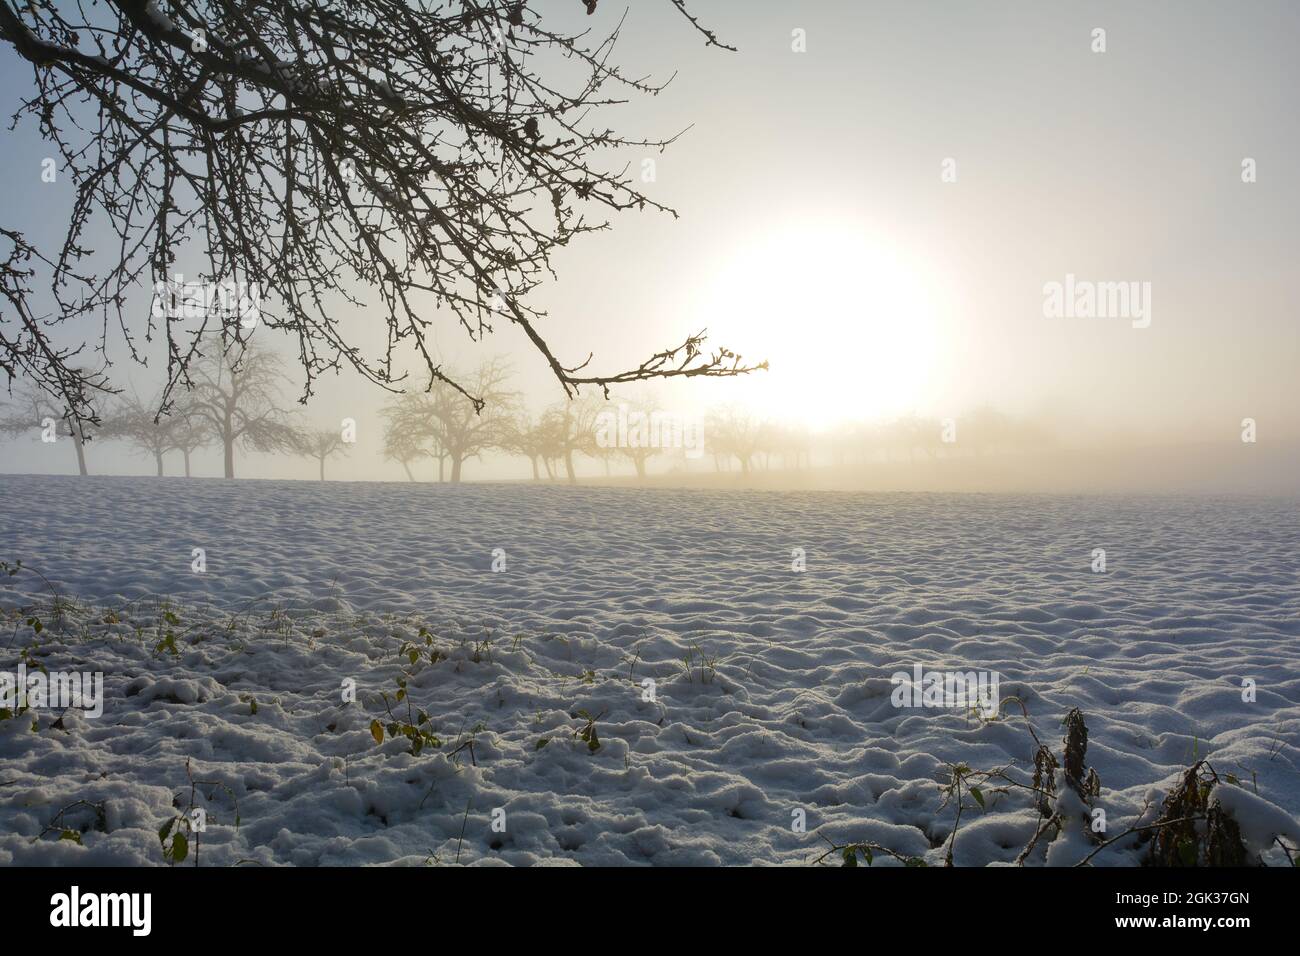 Snow-covered landscape with trees, branches at sunrise Stock Photo